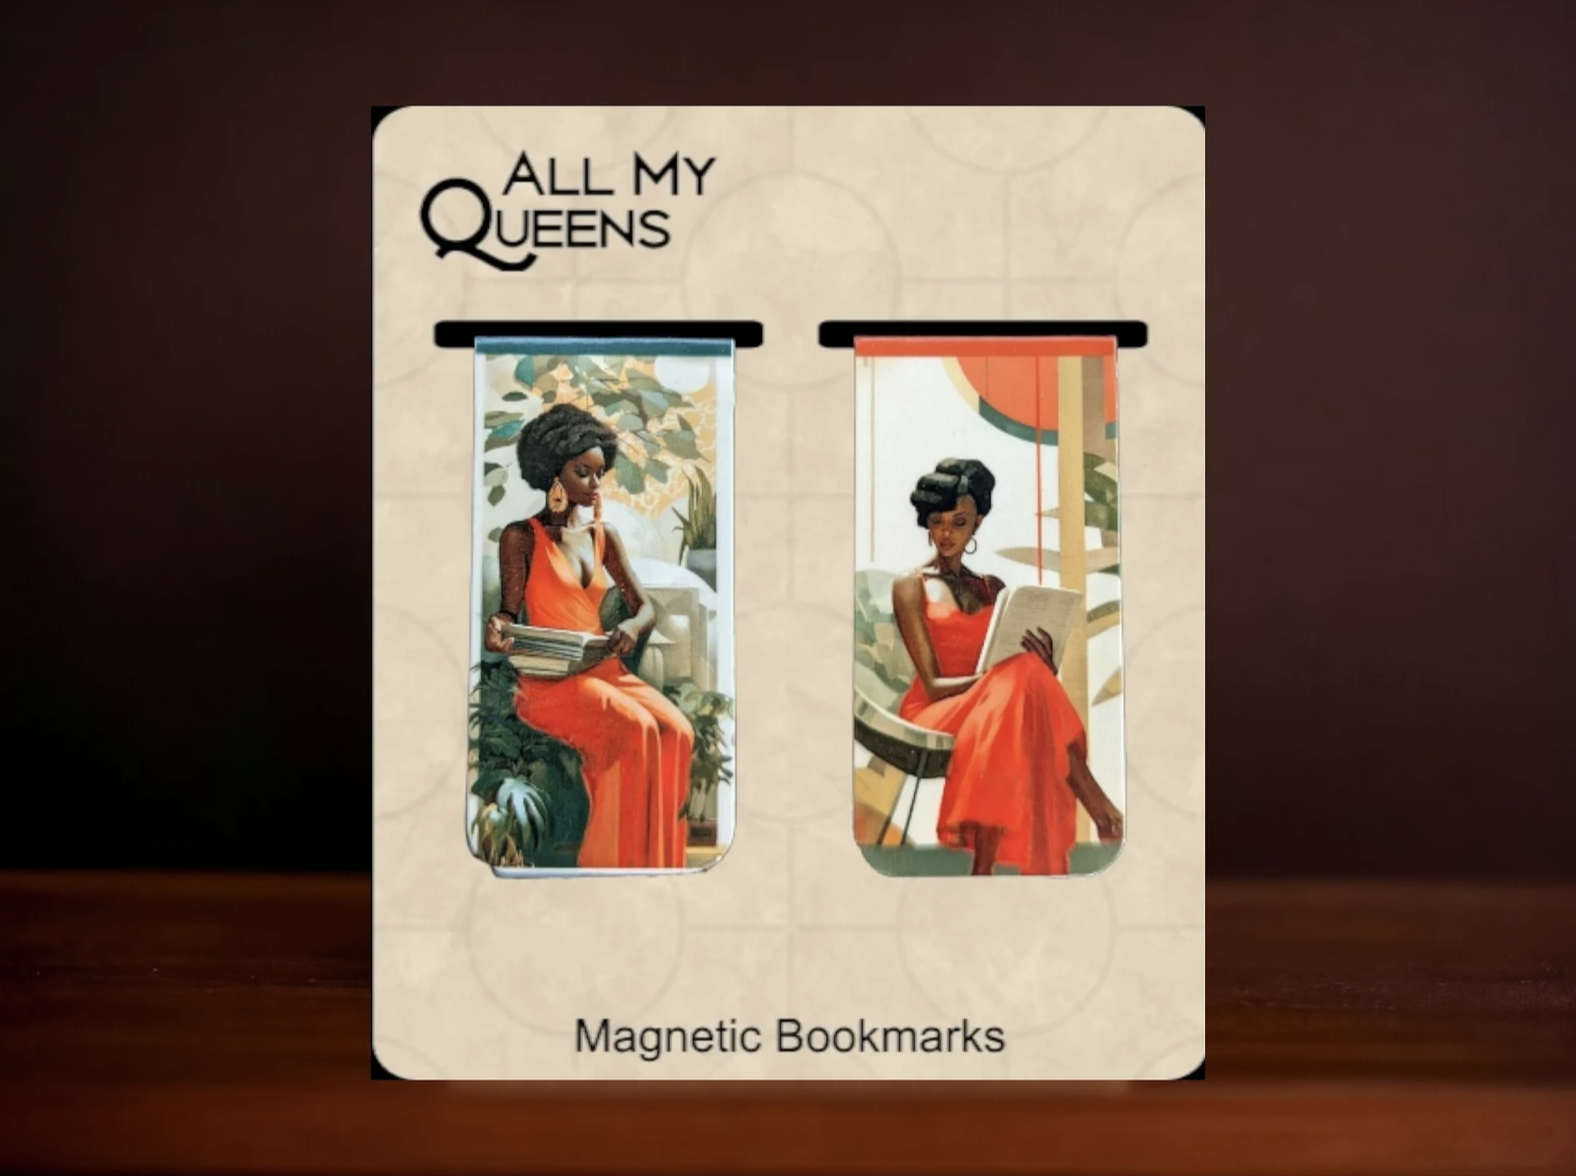 Two magnetic bookmarks with brown-skinned Black women reading on them